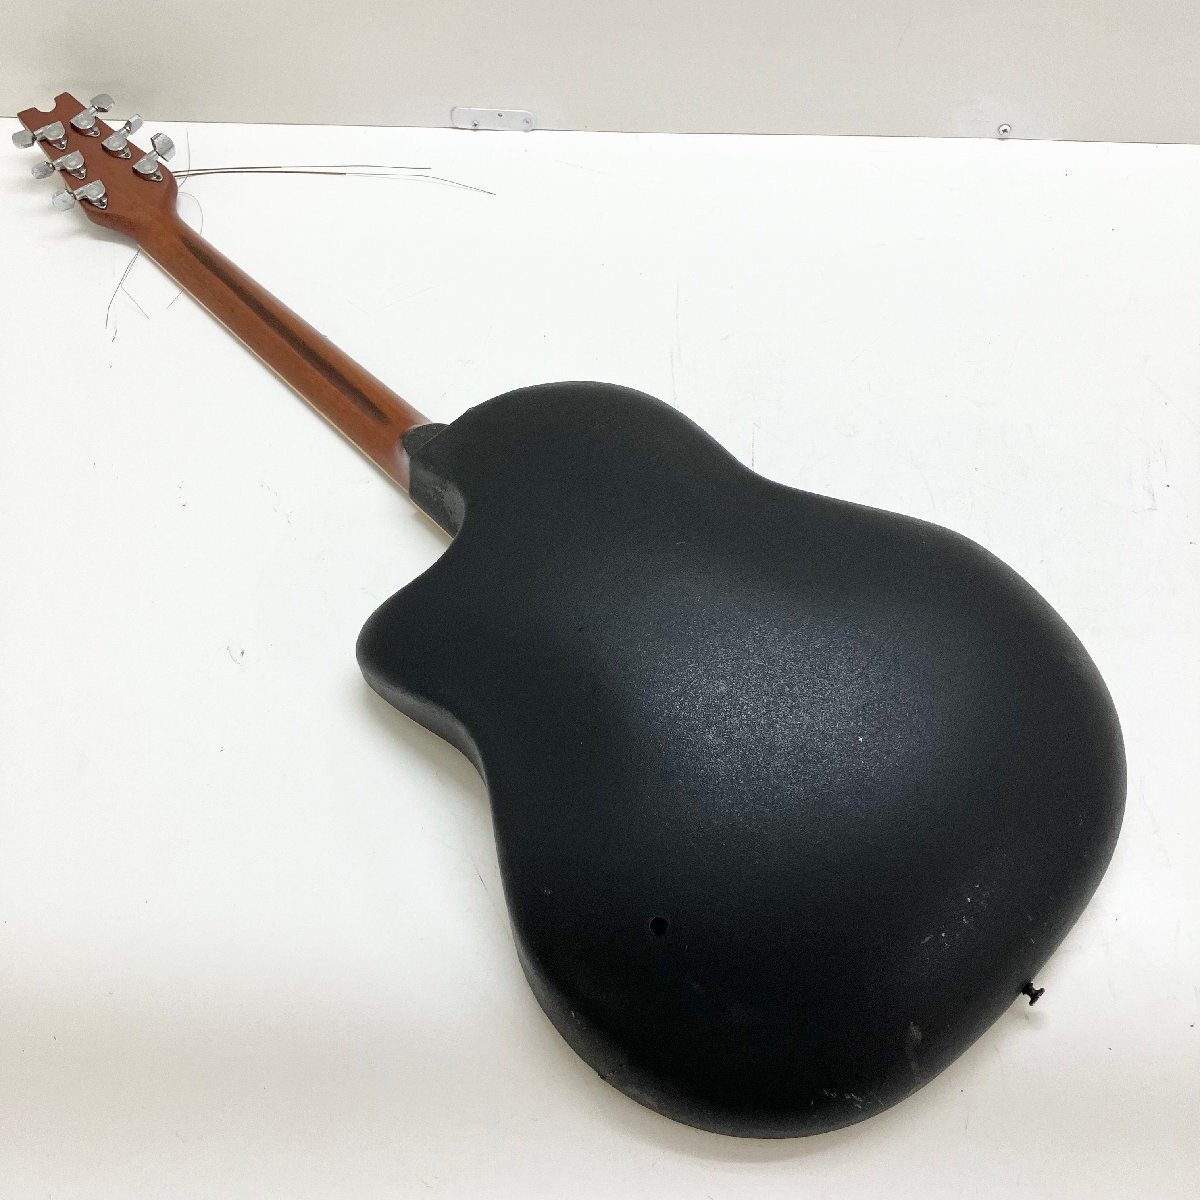 *[ junk ]Applause Applause AE138 electric acoustic guitar acoustic guitar akogi stringed instruments soft case attaching present condition goods (E2)N/G60419/5/2.8